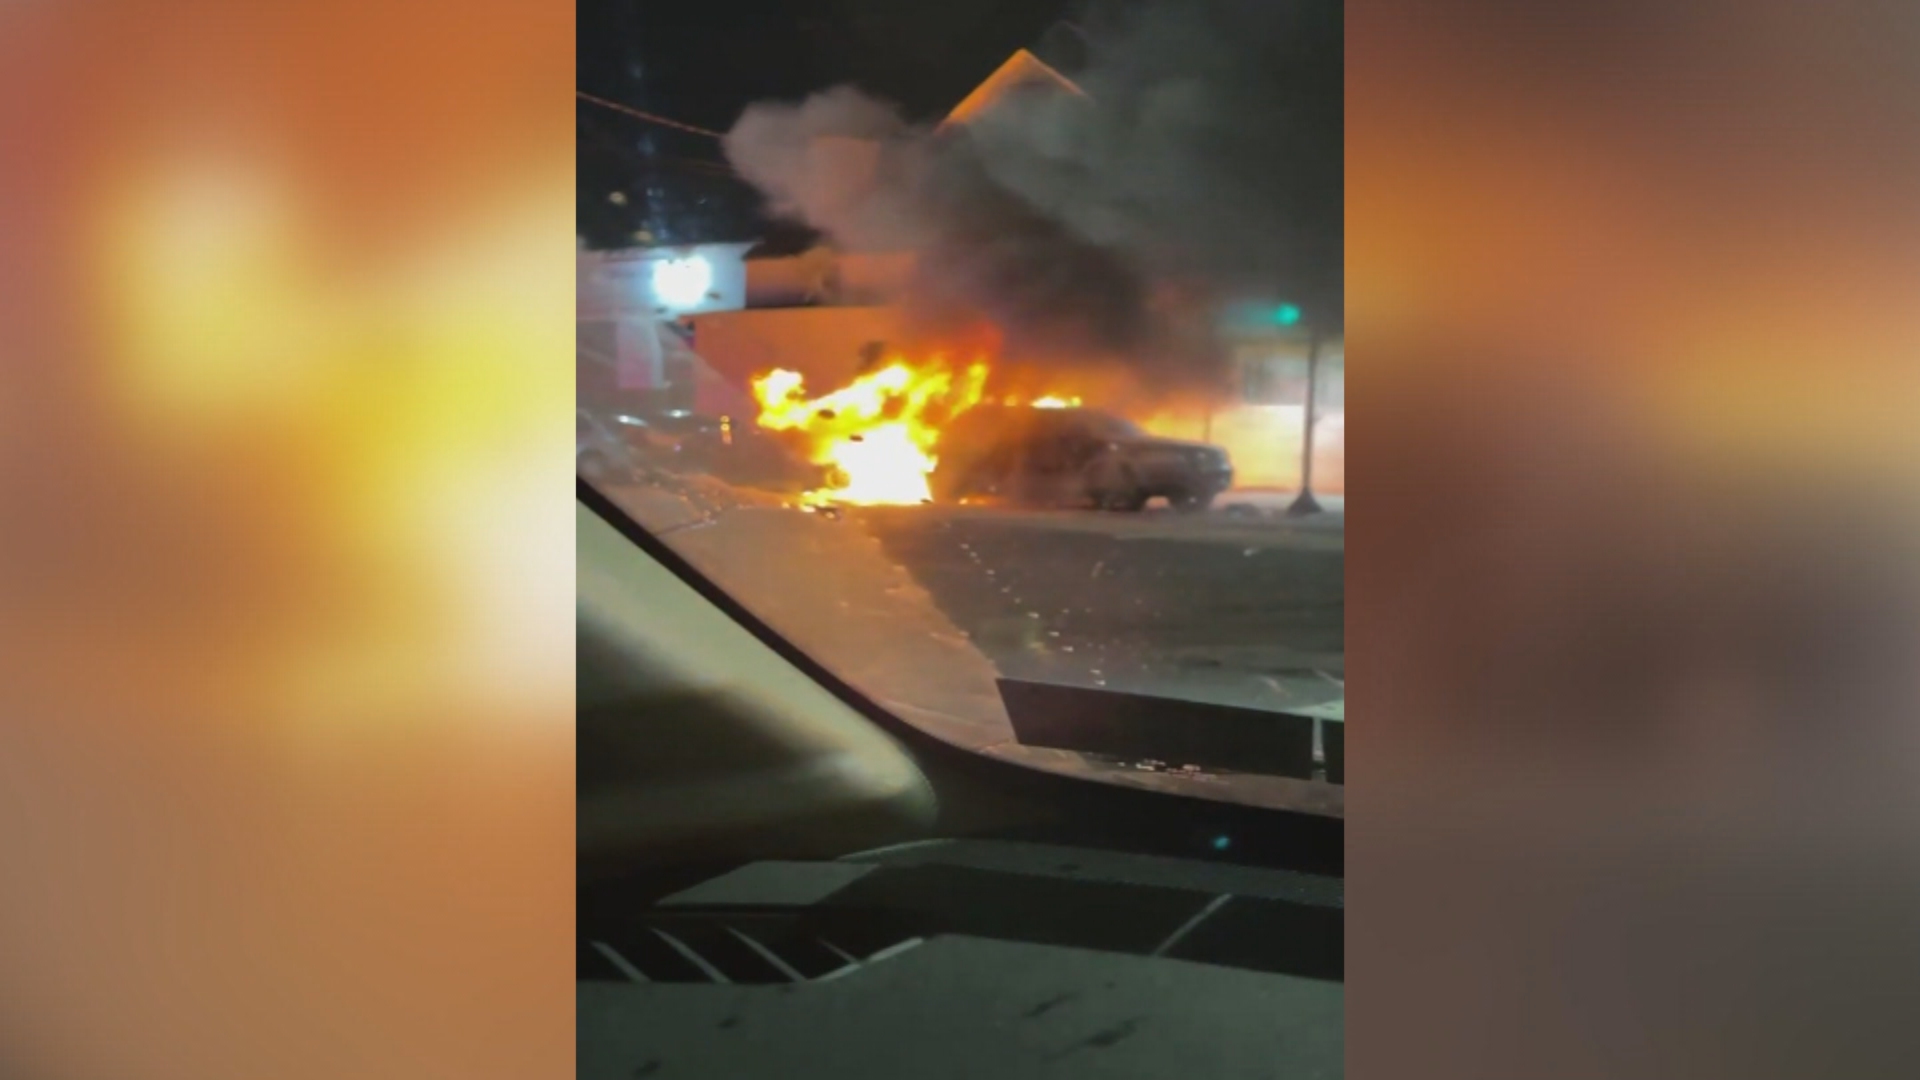 New Video Shows 2 Vehicles In Northeast Philadelphia Catch Fire Overnight – CBS Philly